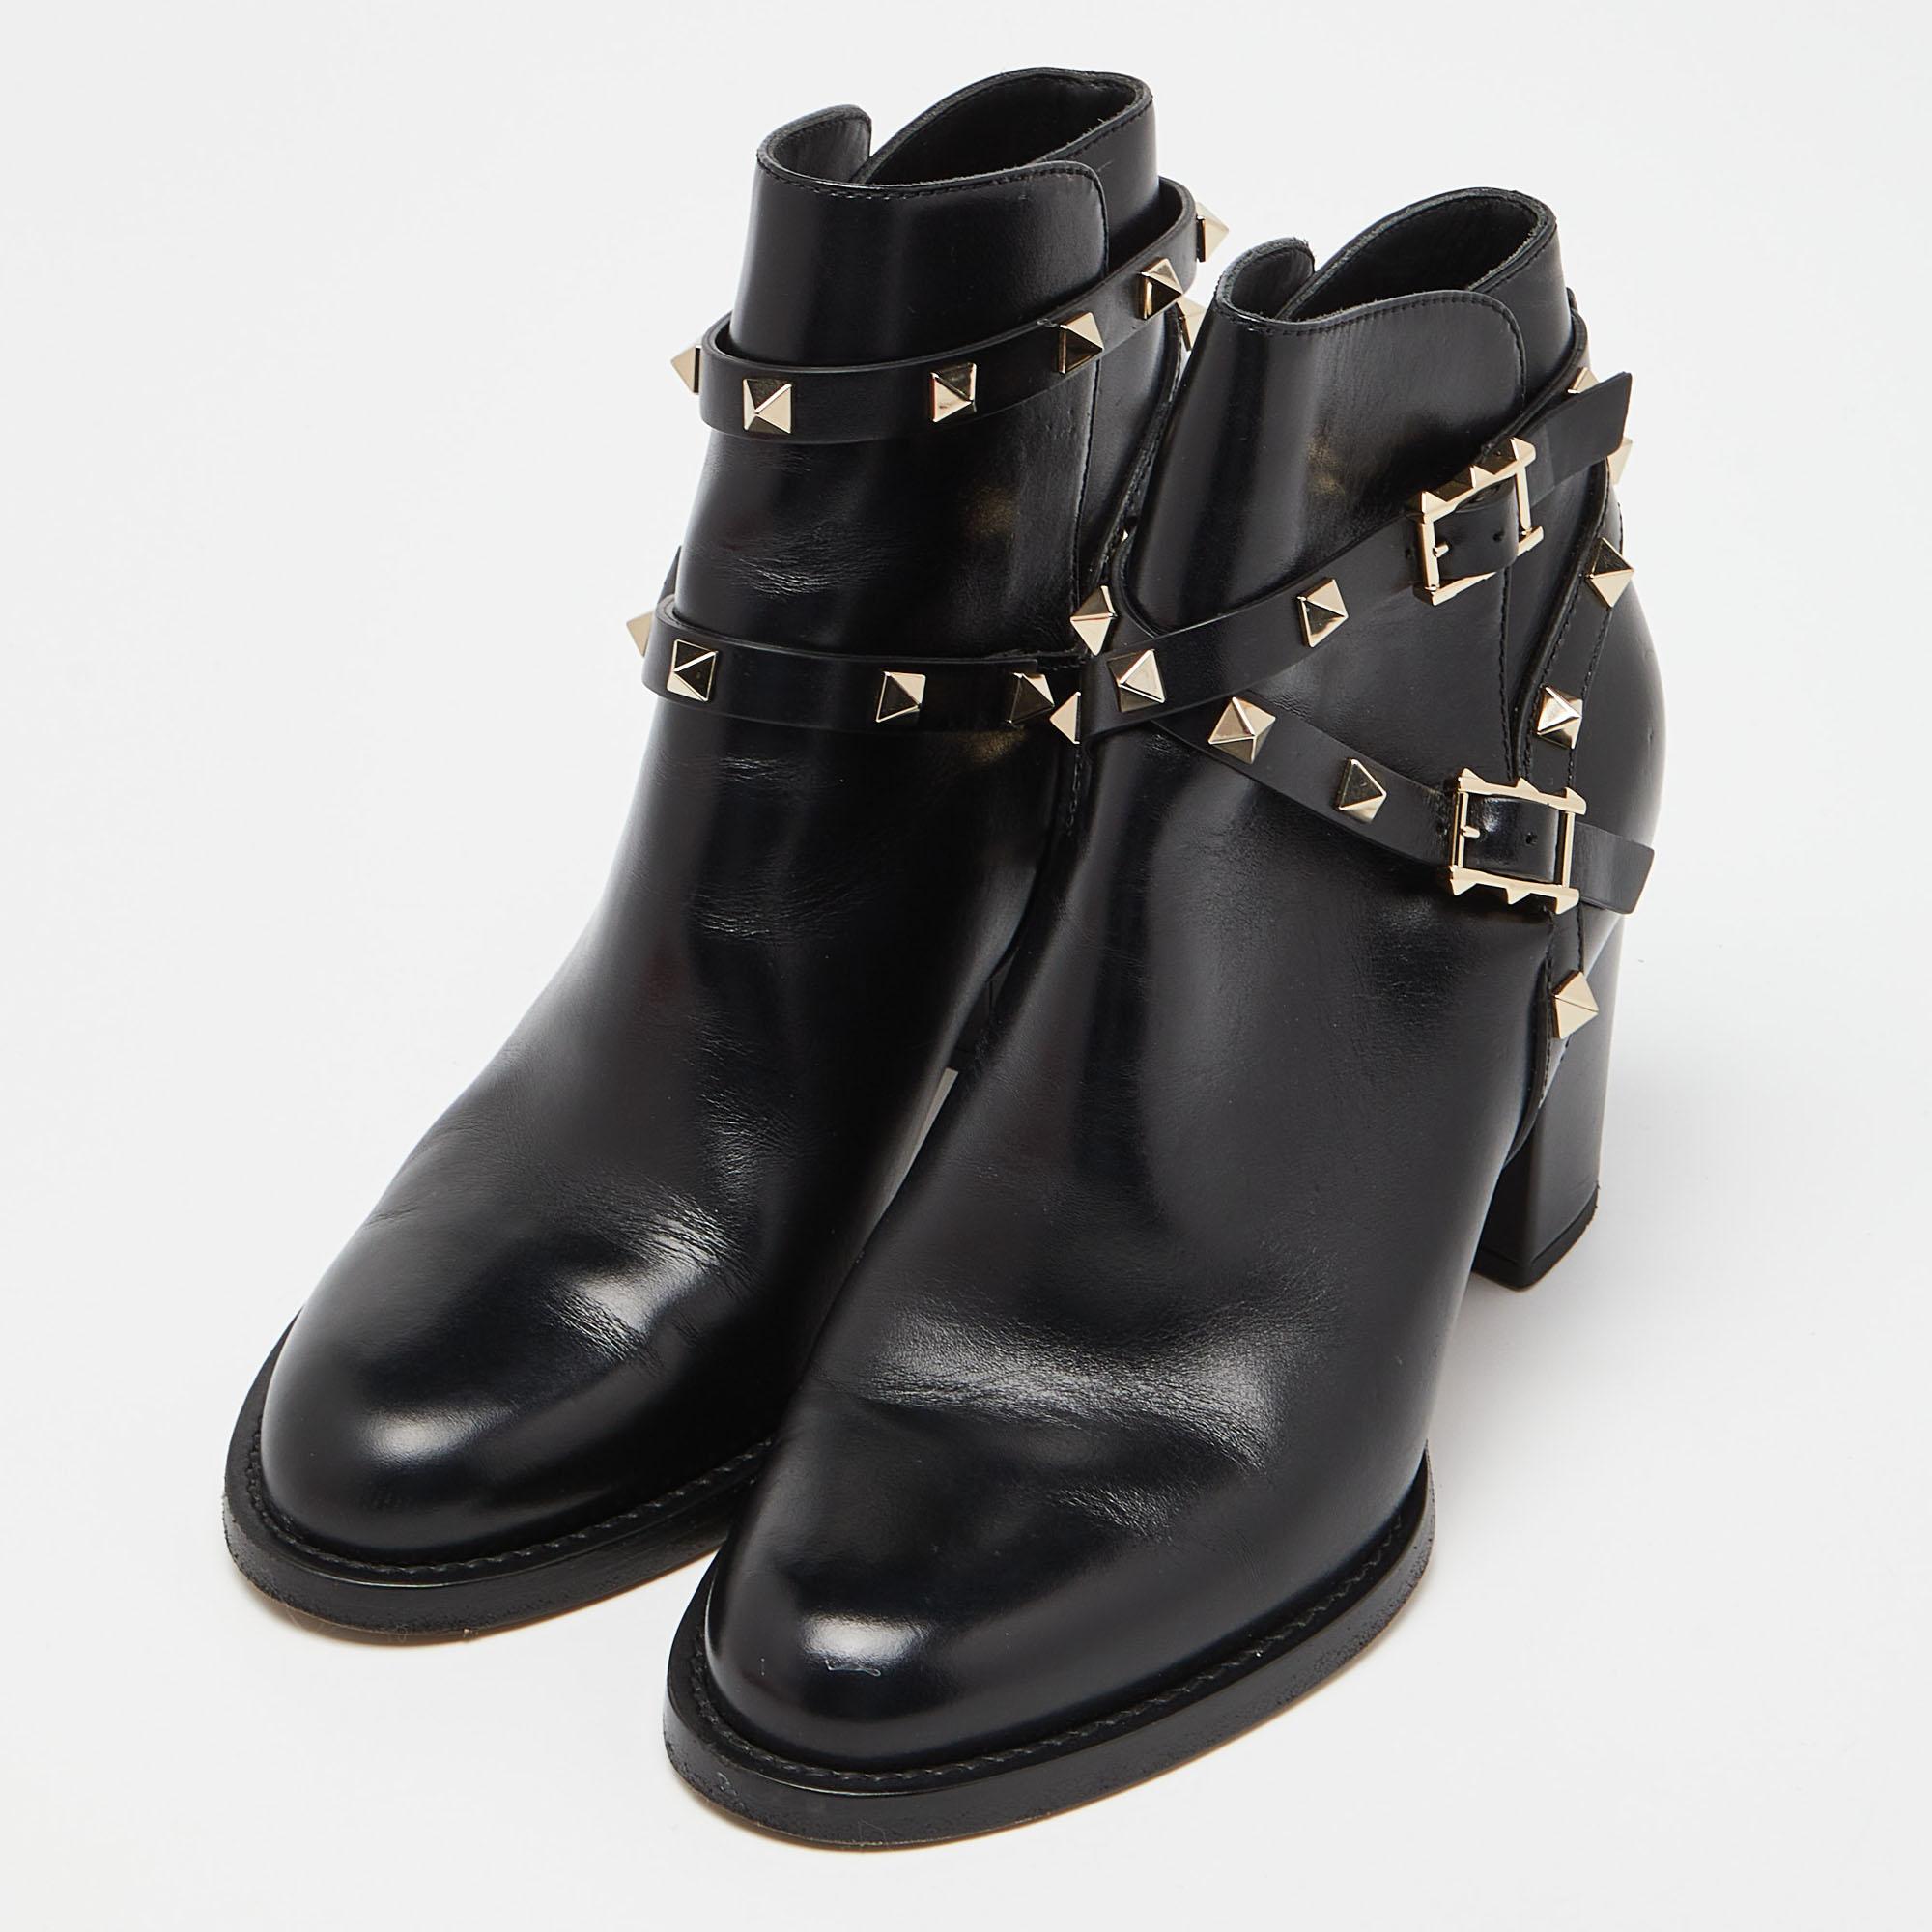 Valentino Black Leather Rockstud Ankle Boots Size 36 4